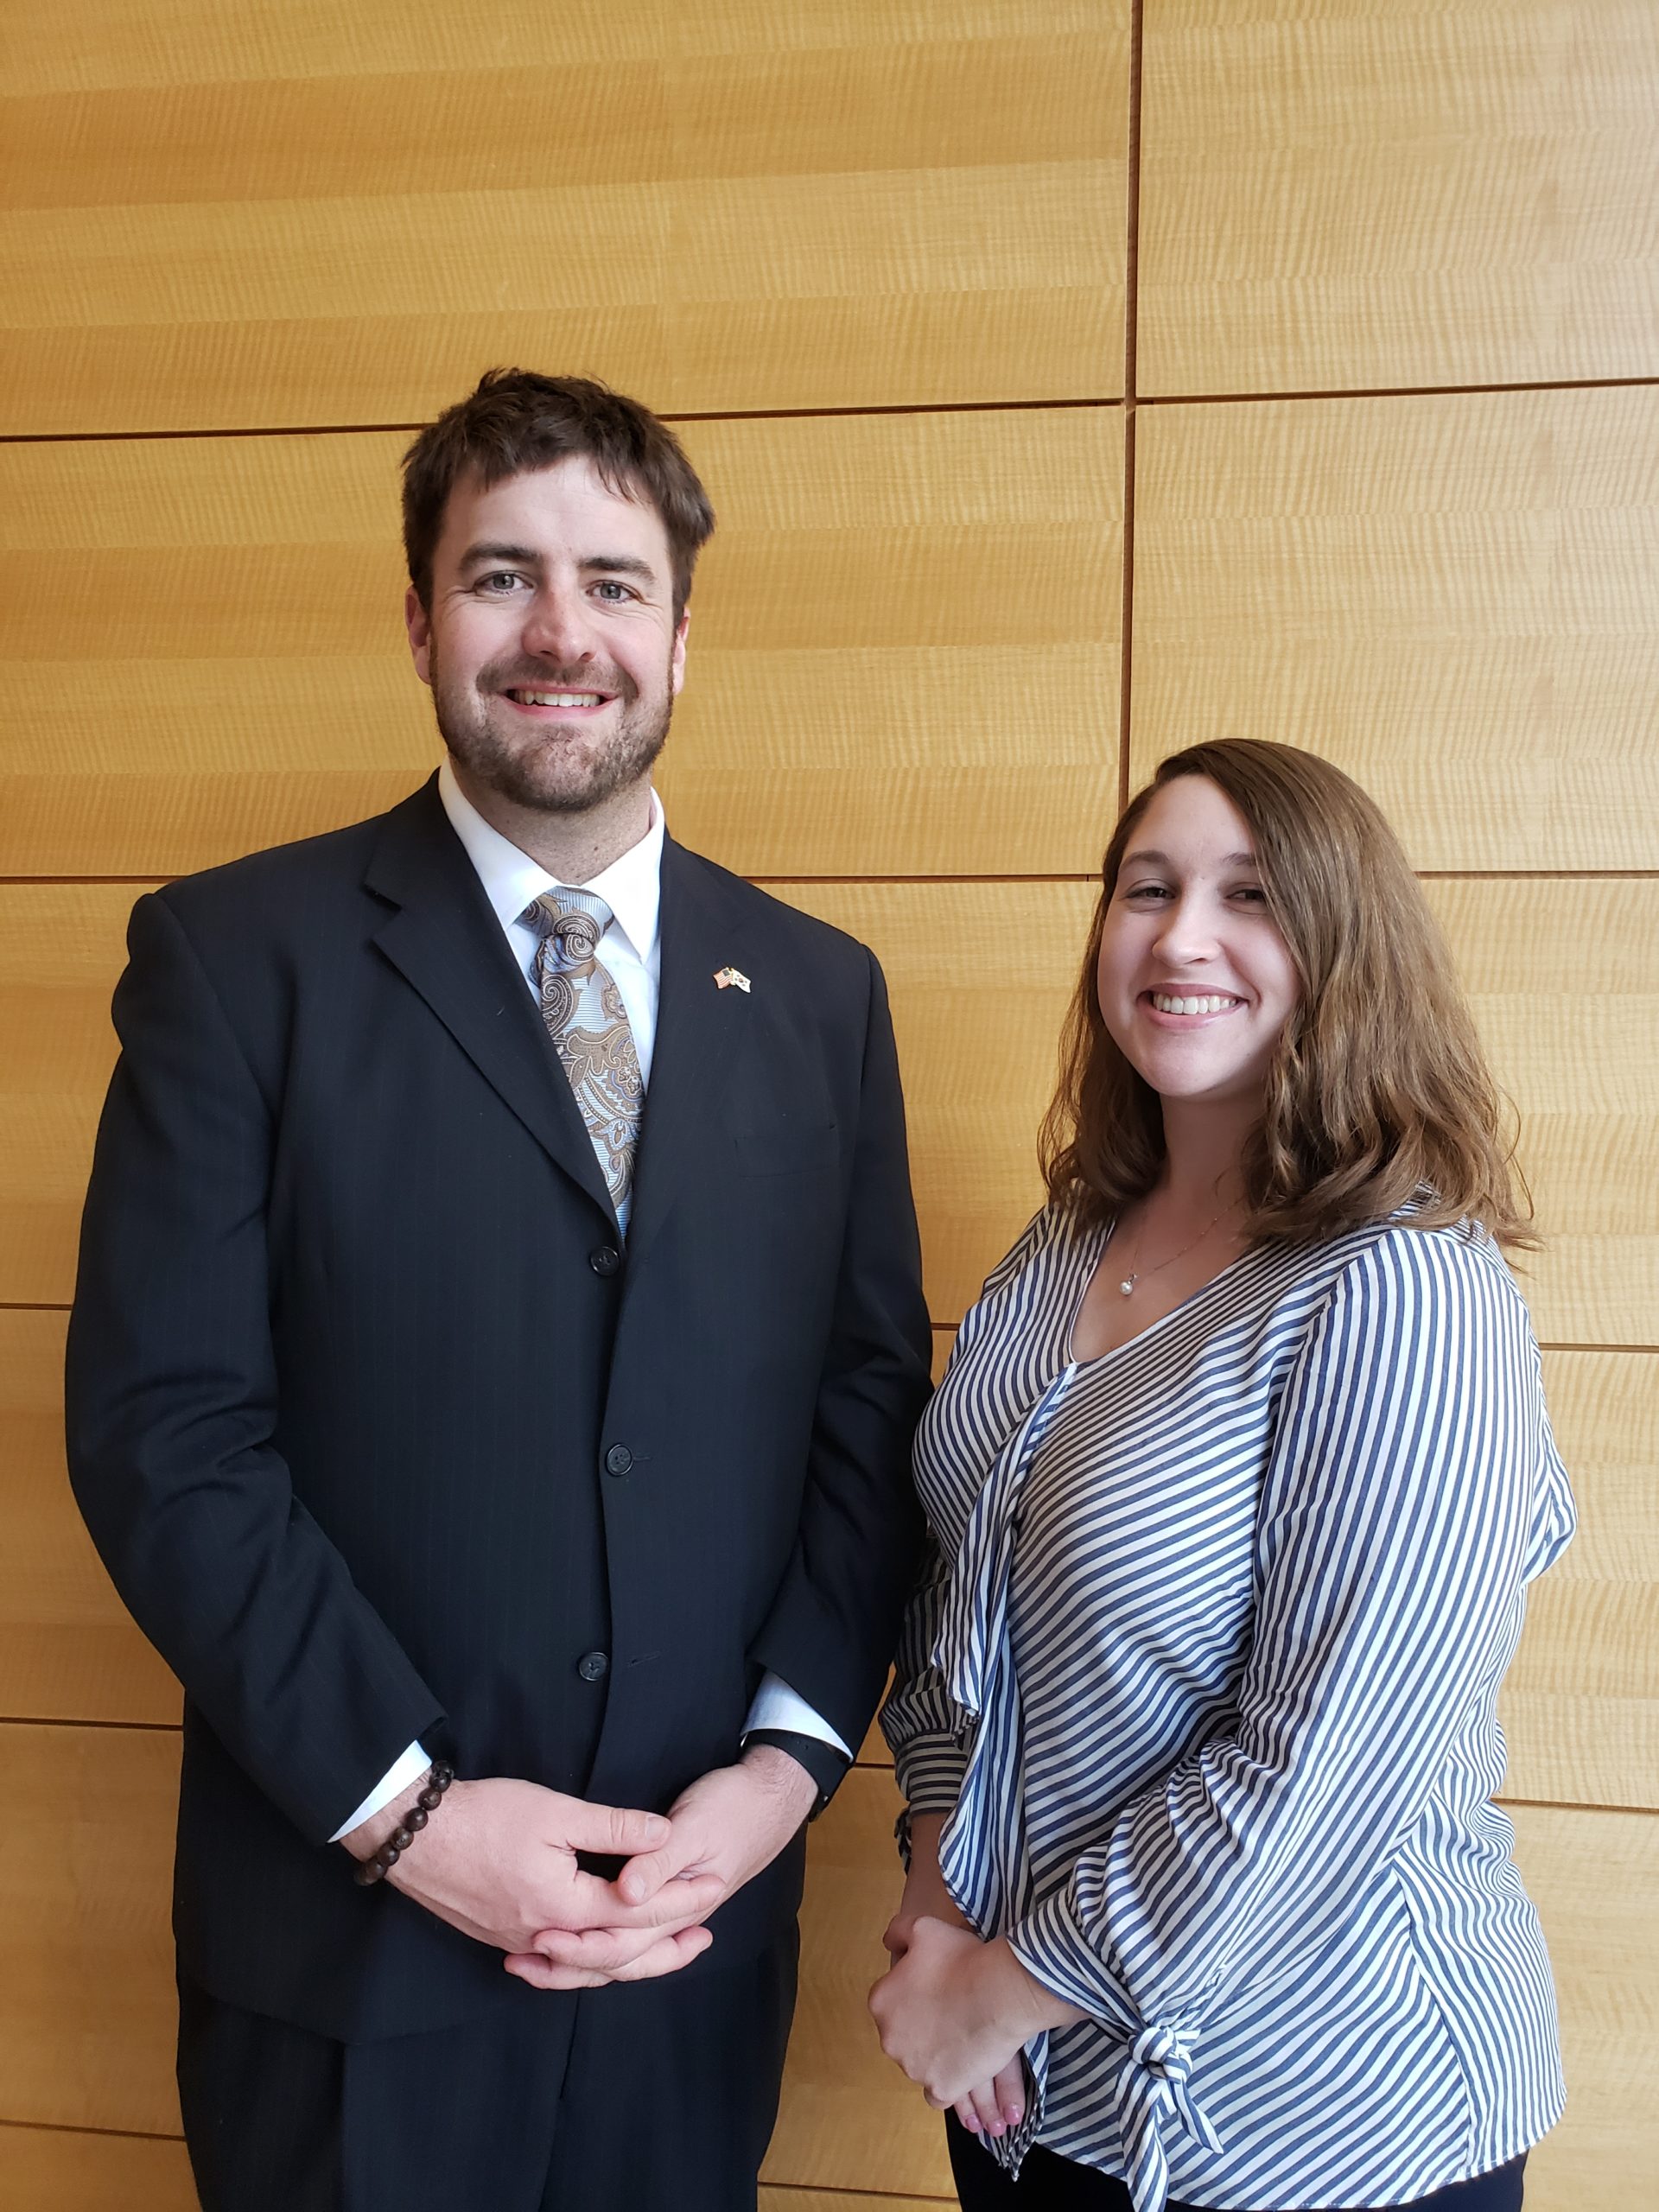 MIP students accepted into prestigious nuclear security program at top national laboratory